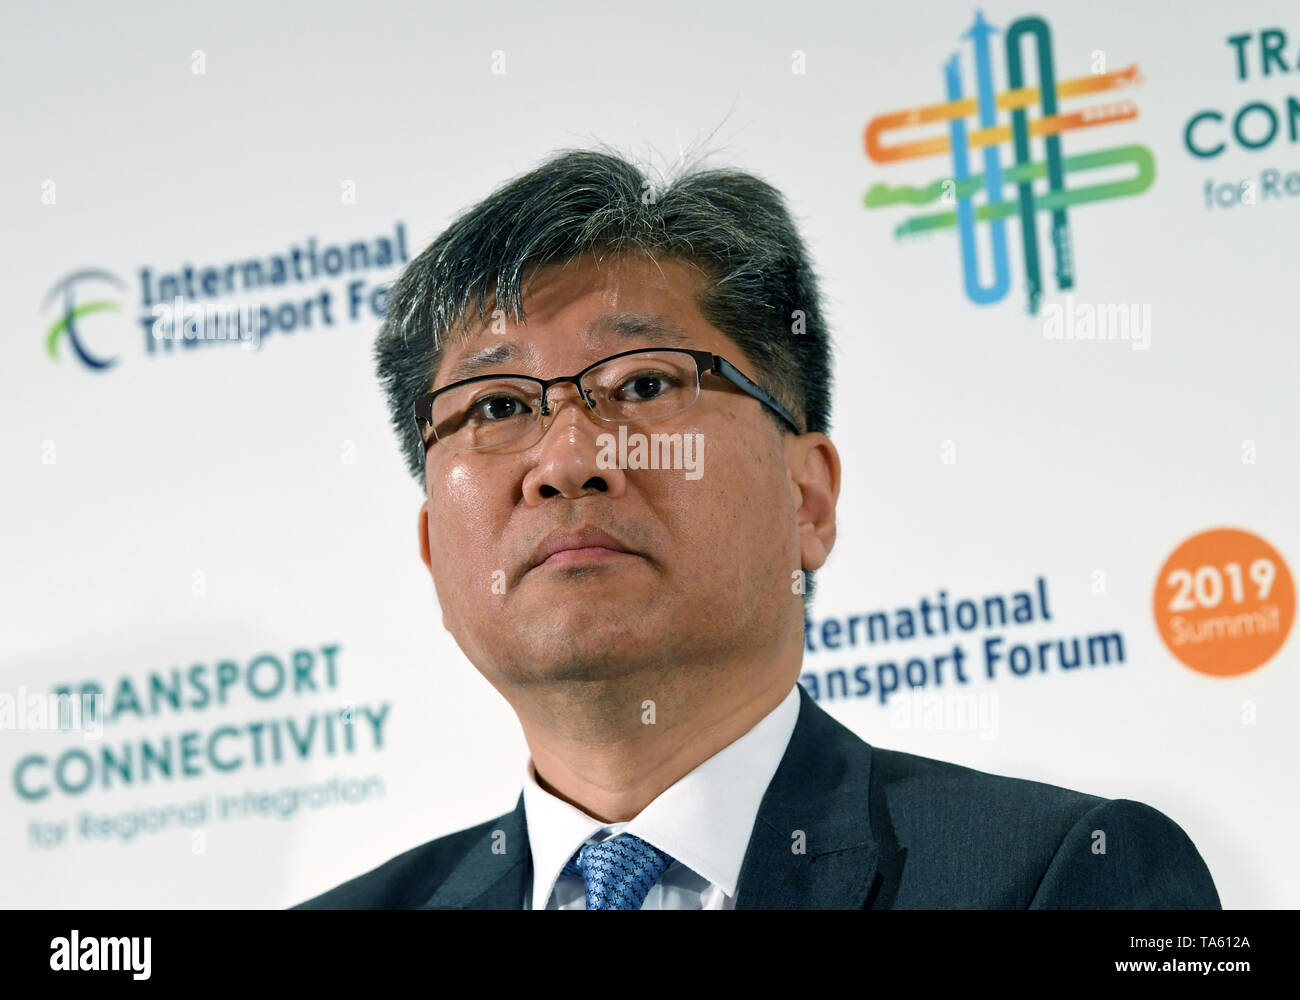 Leipzig, Germany. 22nd May, 2019. Young Tae Kim, Secretary General of the International Transport Forum (ITF), speaks at the opening press conference of the International Transport Forum in Leipzig. Around 1300 scientists and politicians from 70 countries will discuss the mobility of the future at the International Transport Forum. This year, the three-day conference will focus on concepts that bring city and country closer together. Credit: Hendrik Schmidt/dpa-Zentralbild/dpa/Alamy Live News Stock Photo